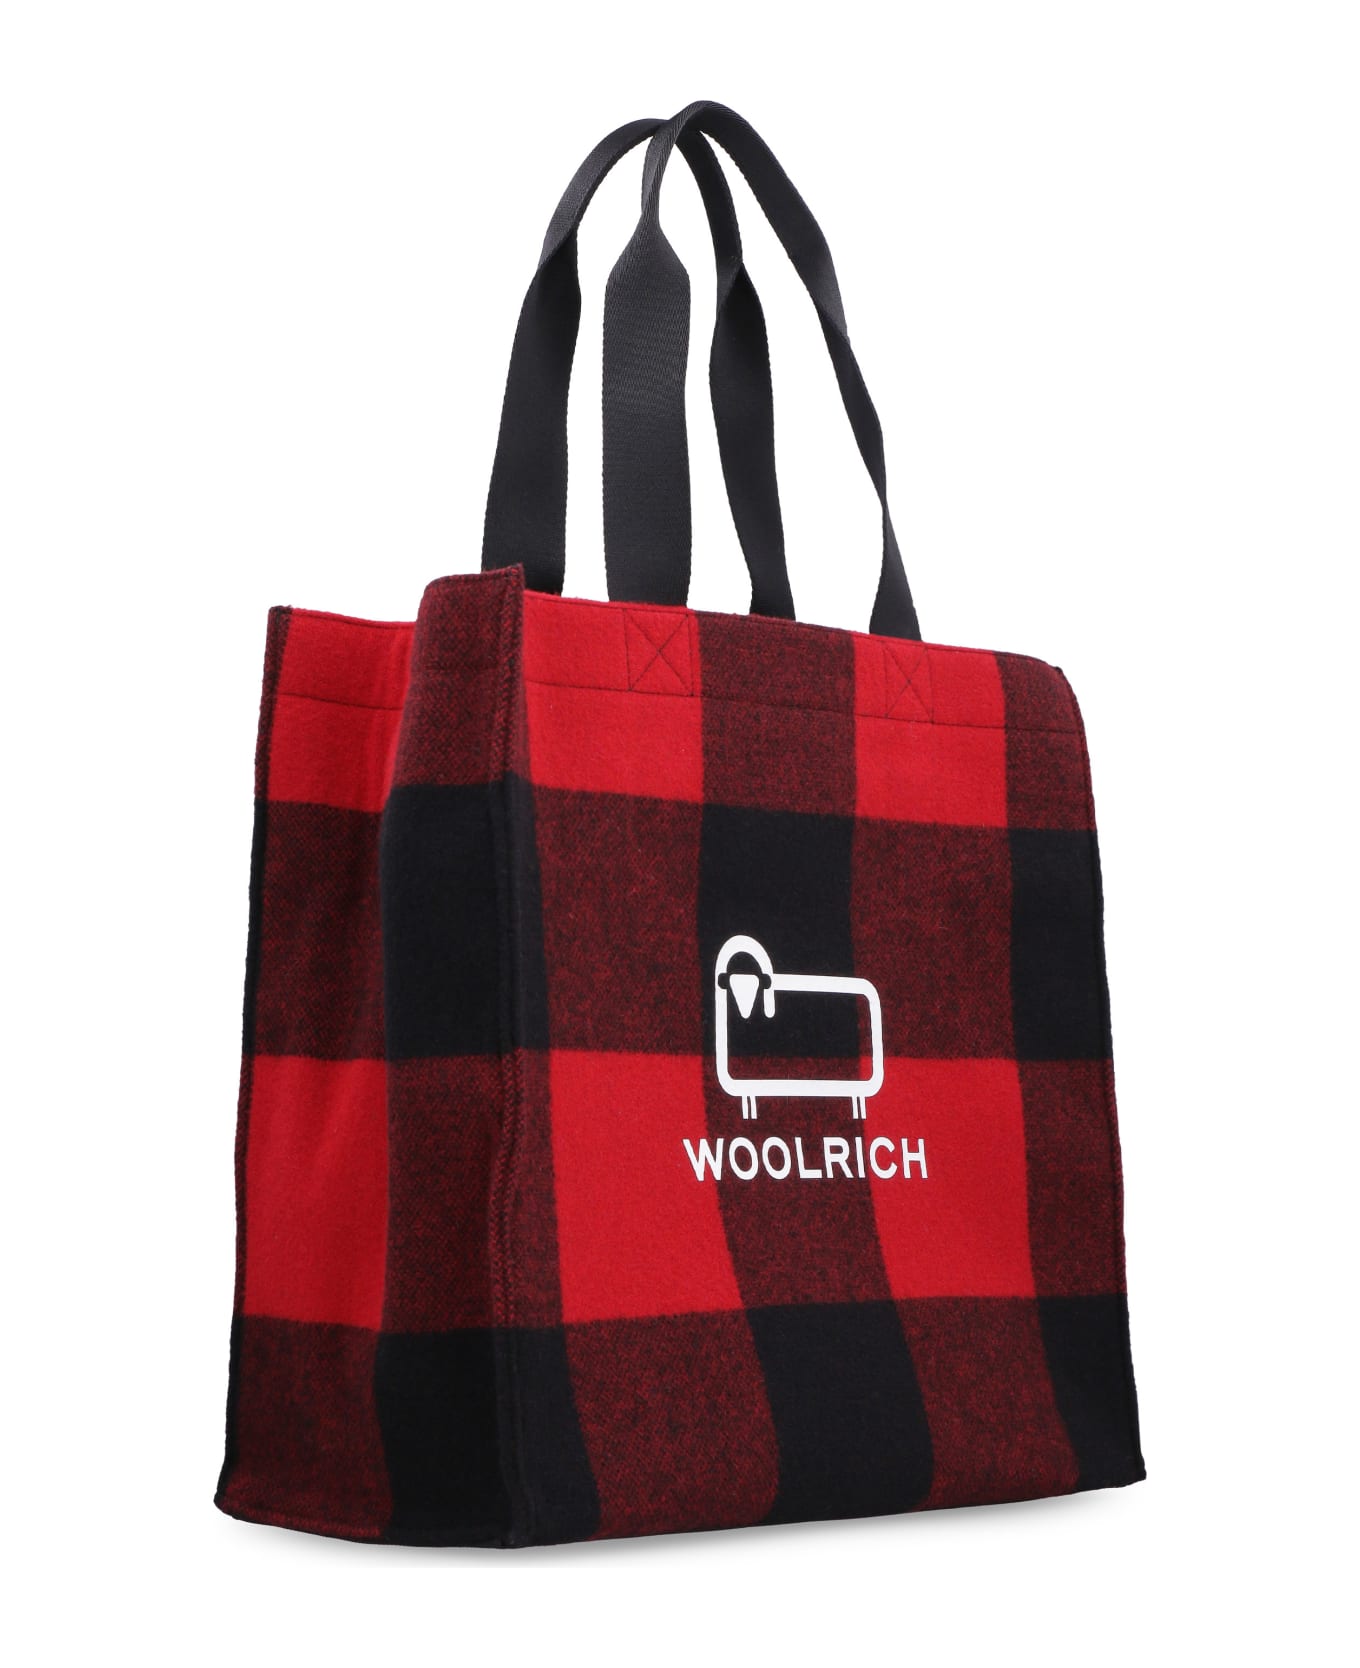 Woolrich Logo Detail Tote Bag - Multicolor トートバッグ